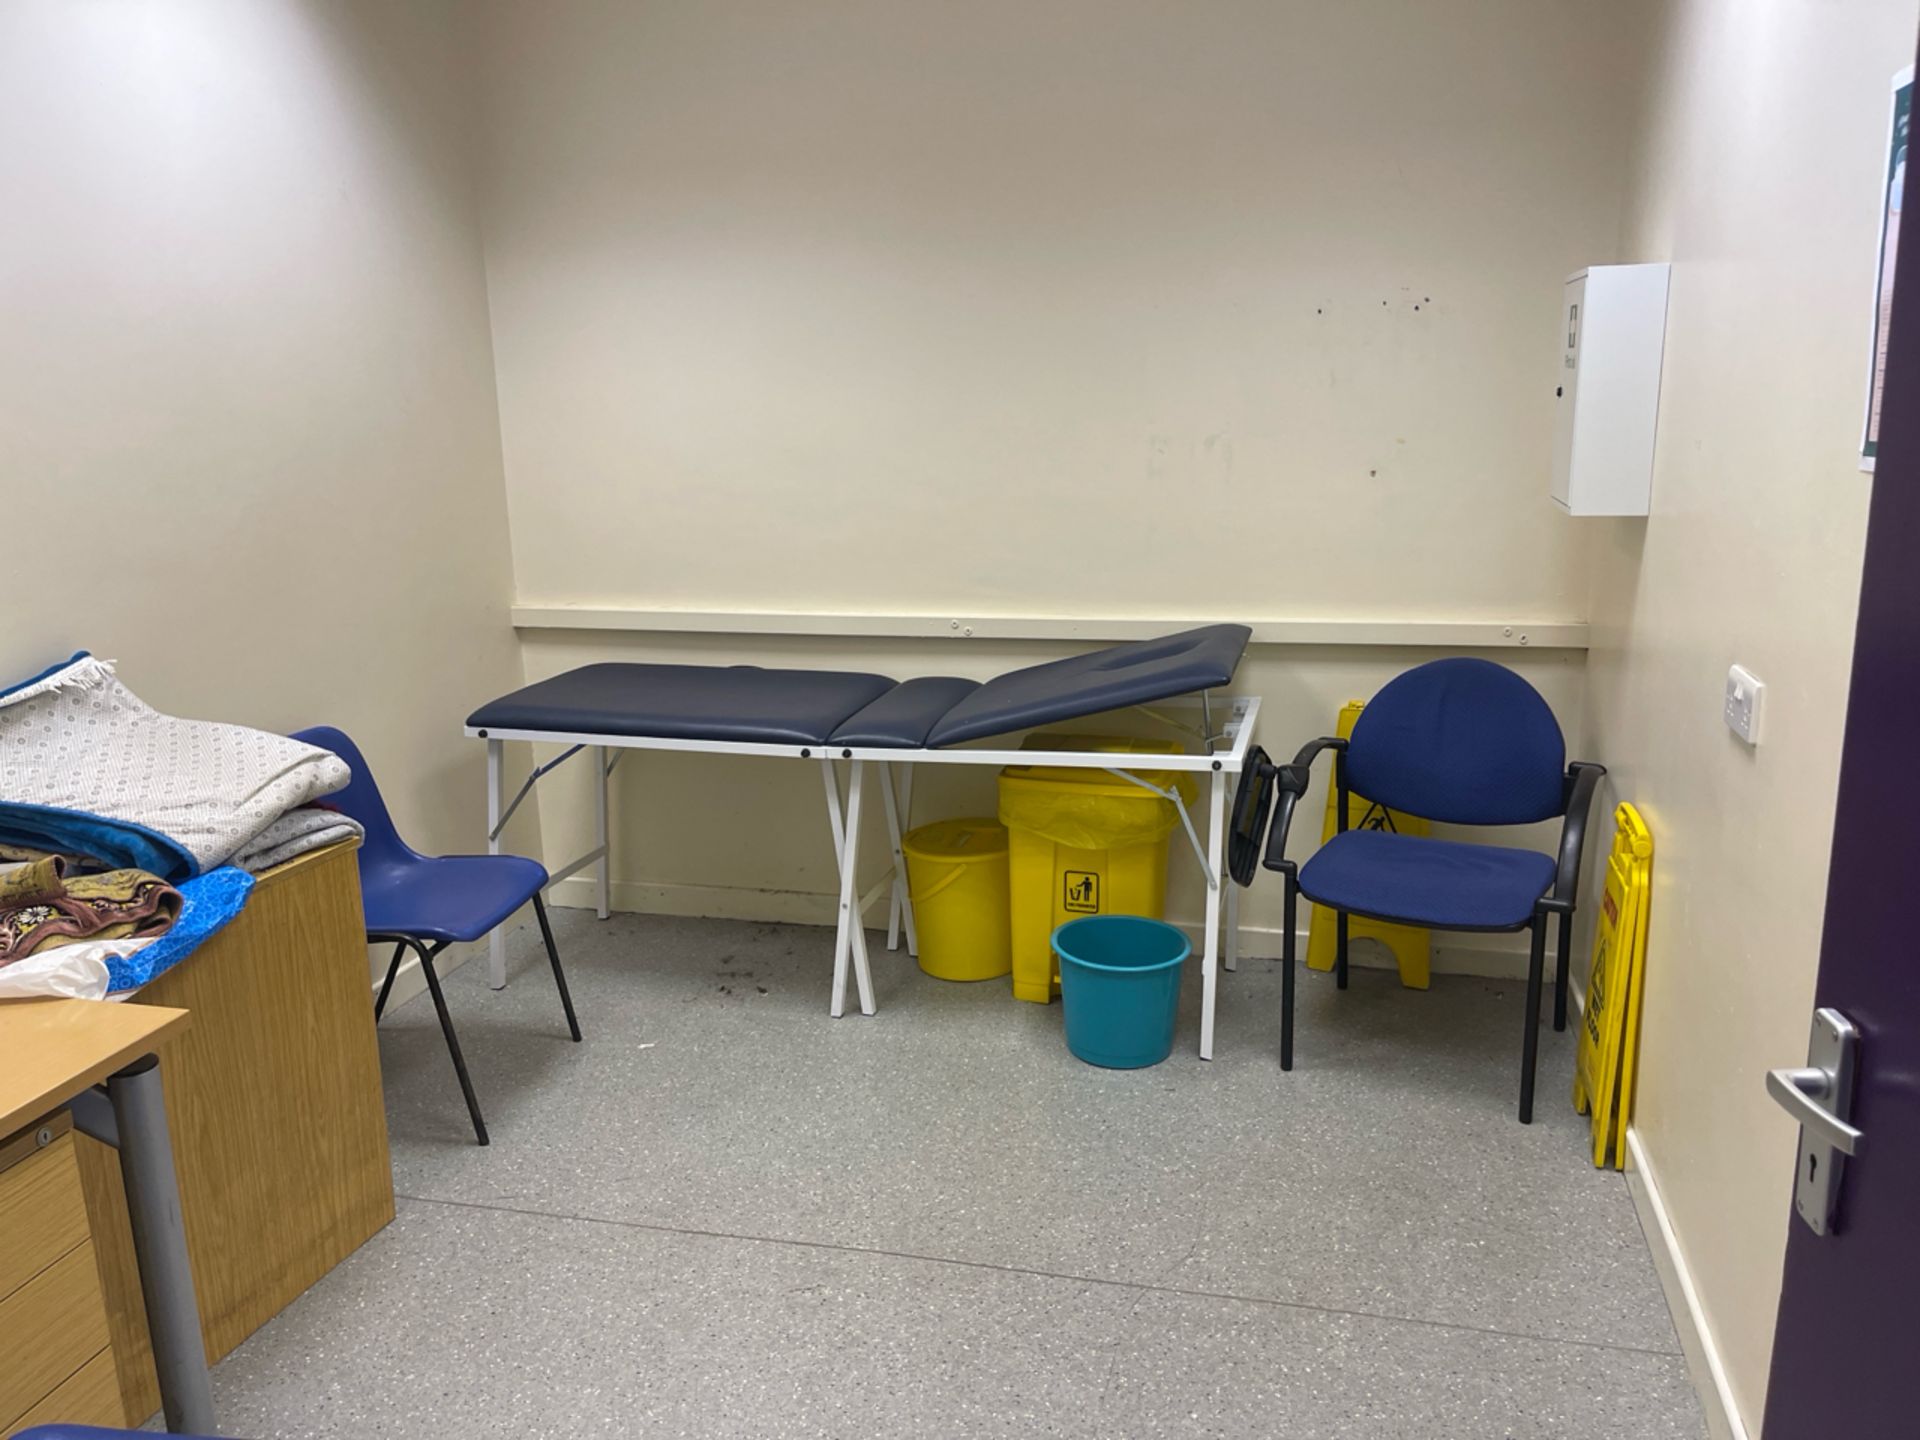 Contents Of First Aid Room